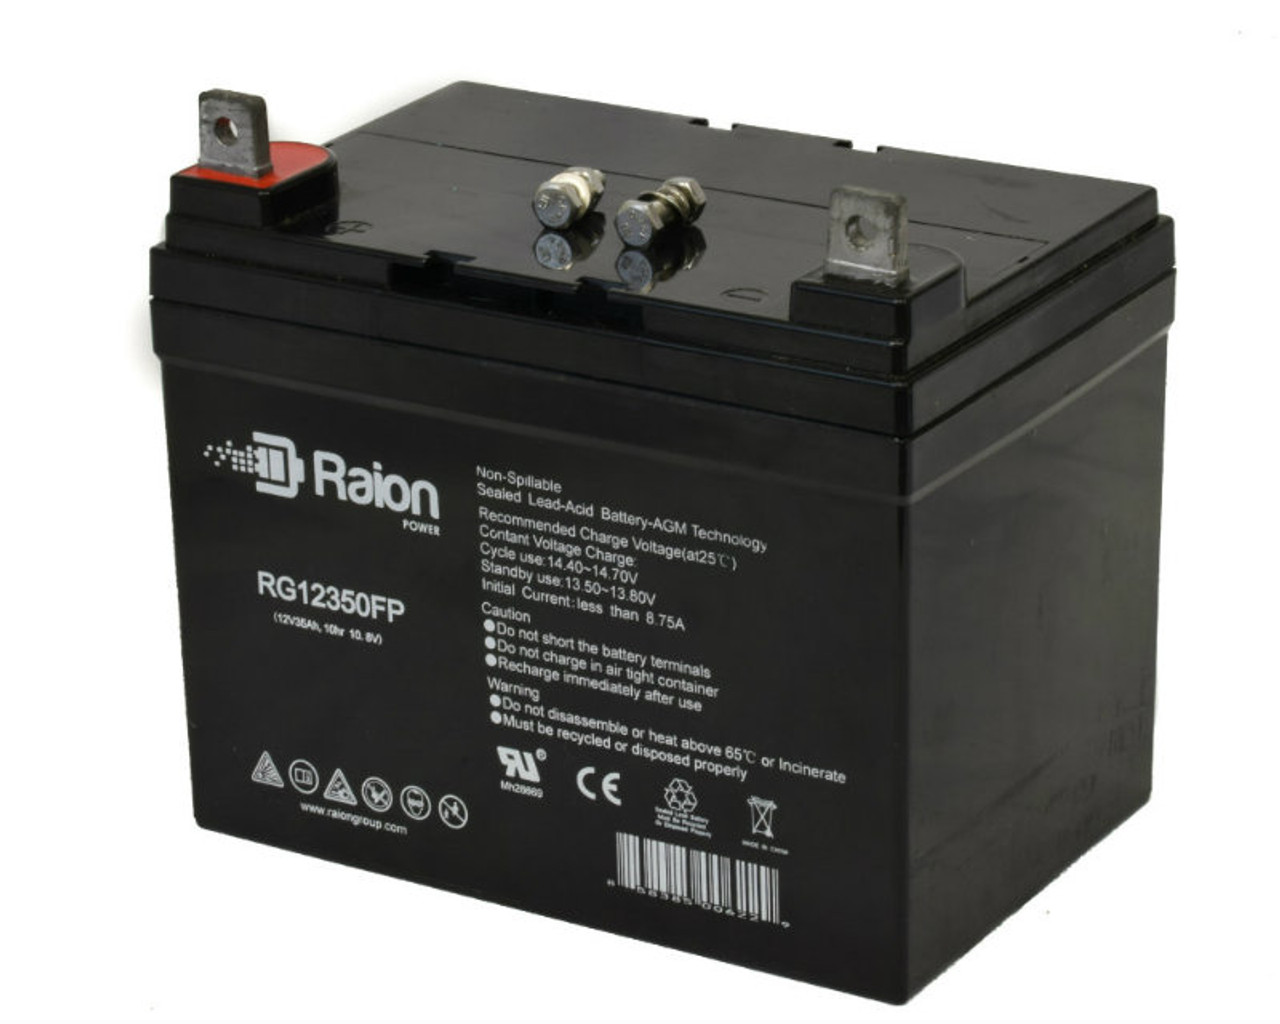 Raion Power Replacement 12V 35Ah Battery for Ingersol Equipment 220 - 1 Pack